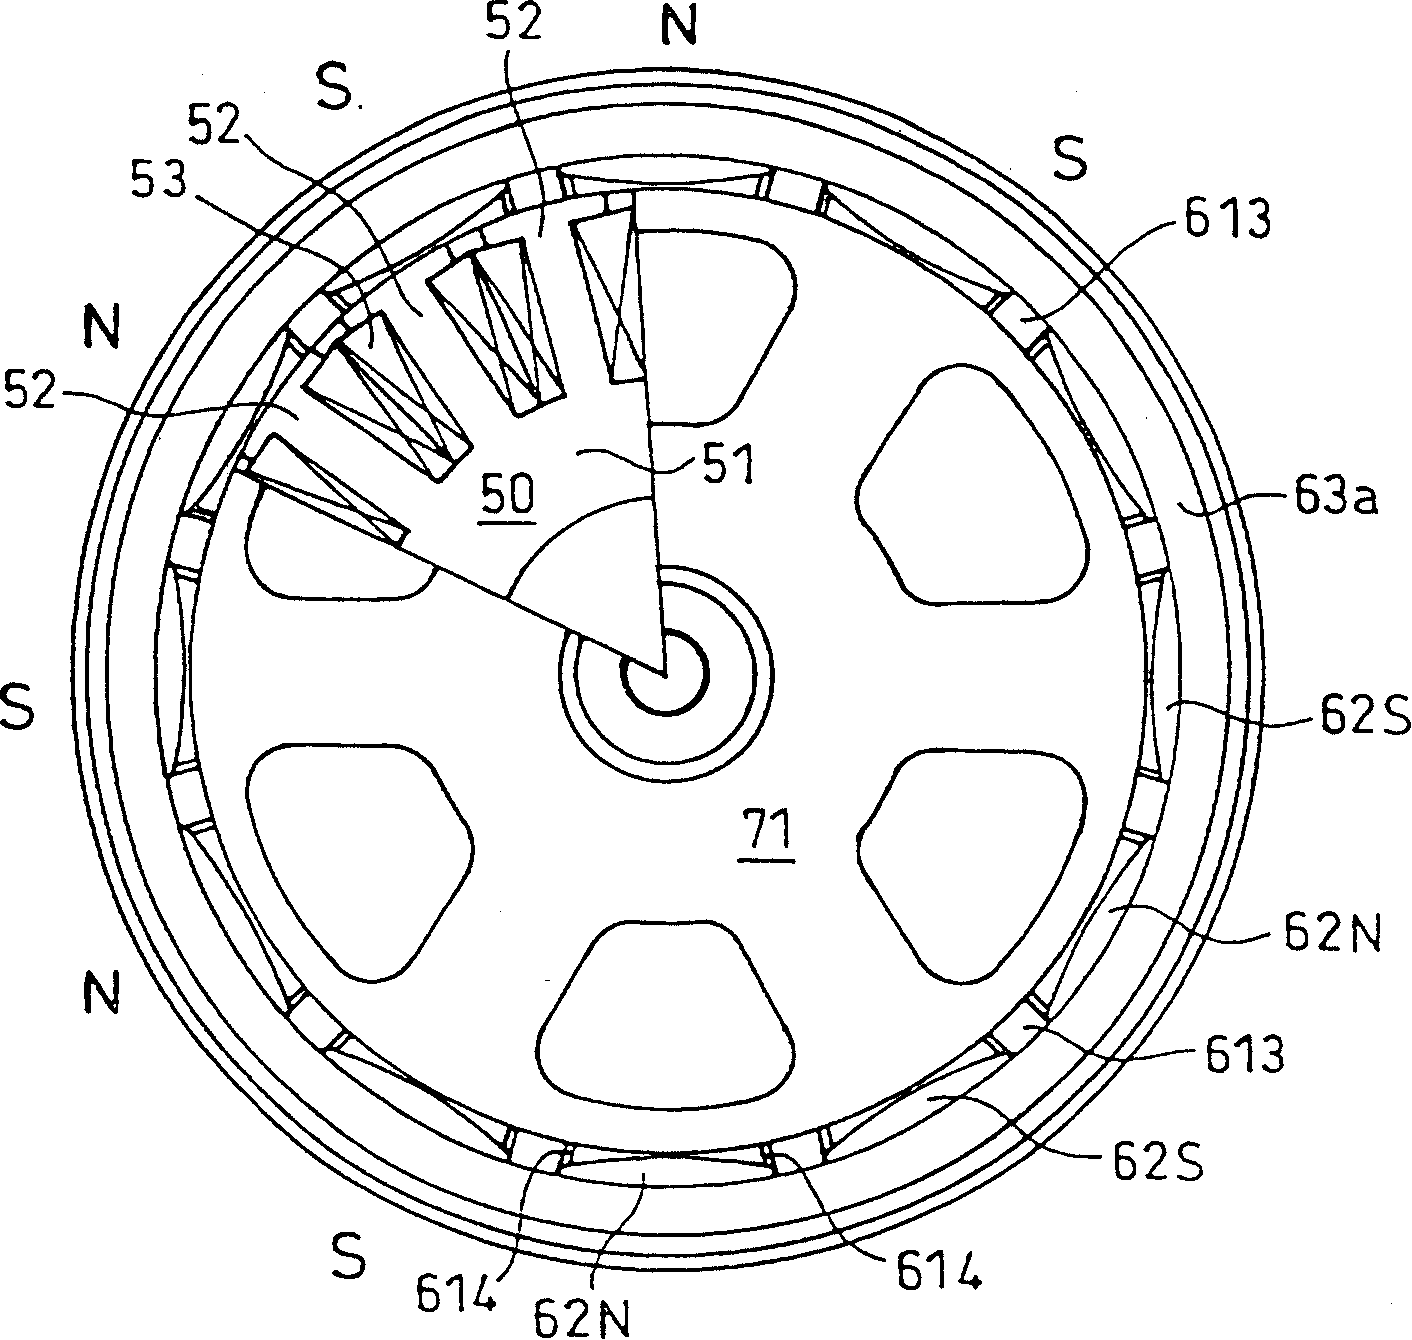 Permanent-magnet rotary motor